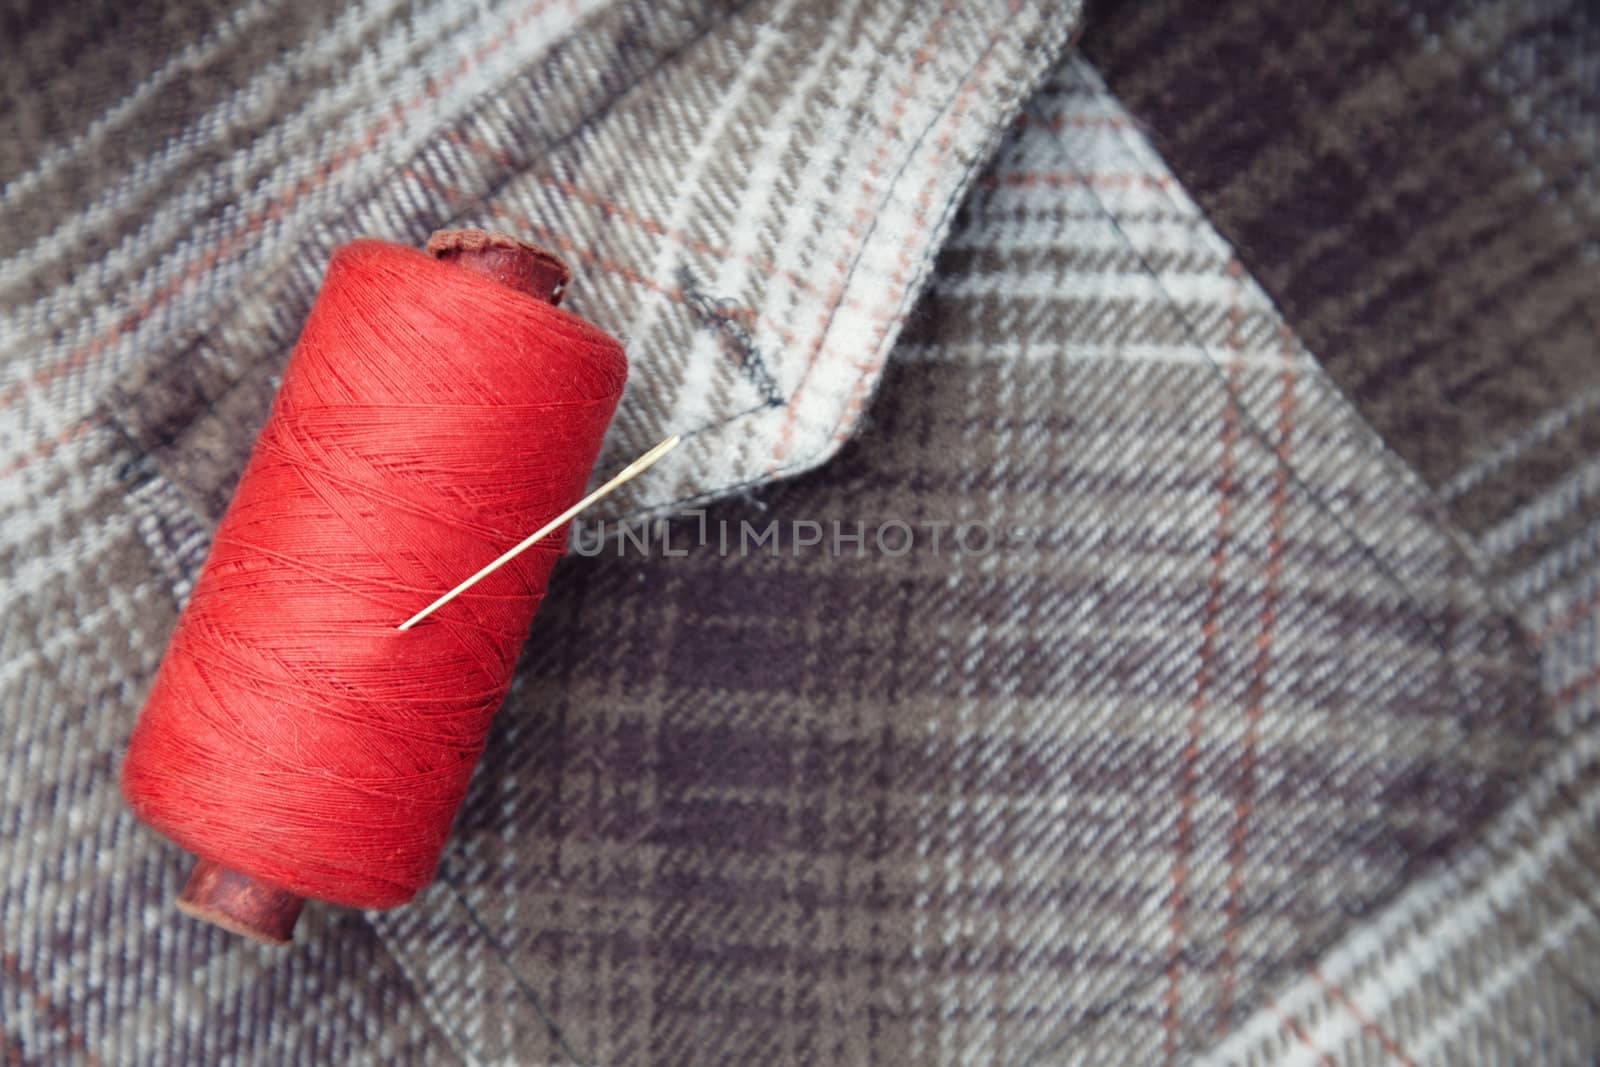 Red sewing spool with needle on a flannel fiber. Close-up photo